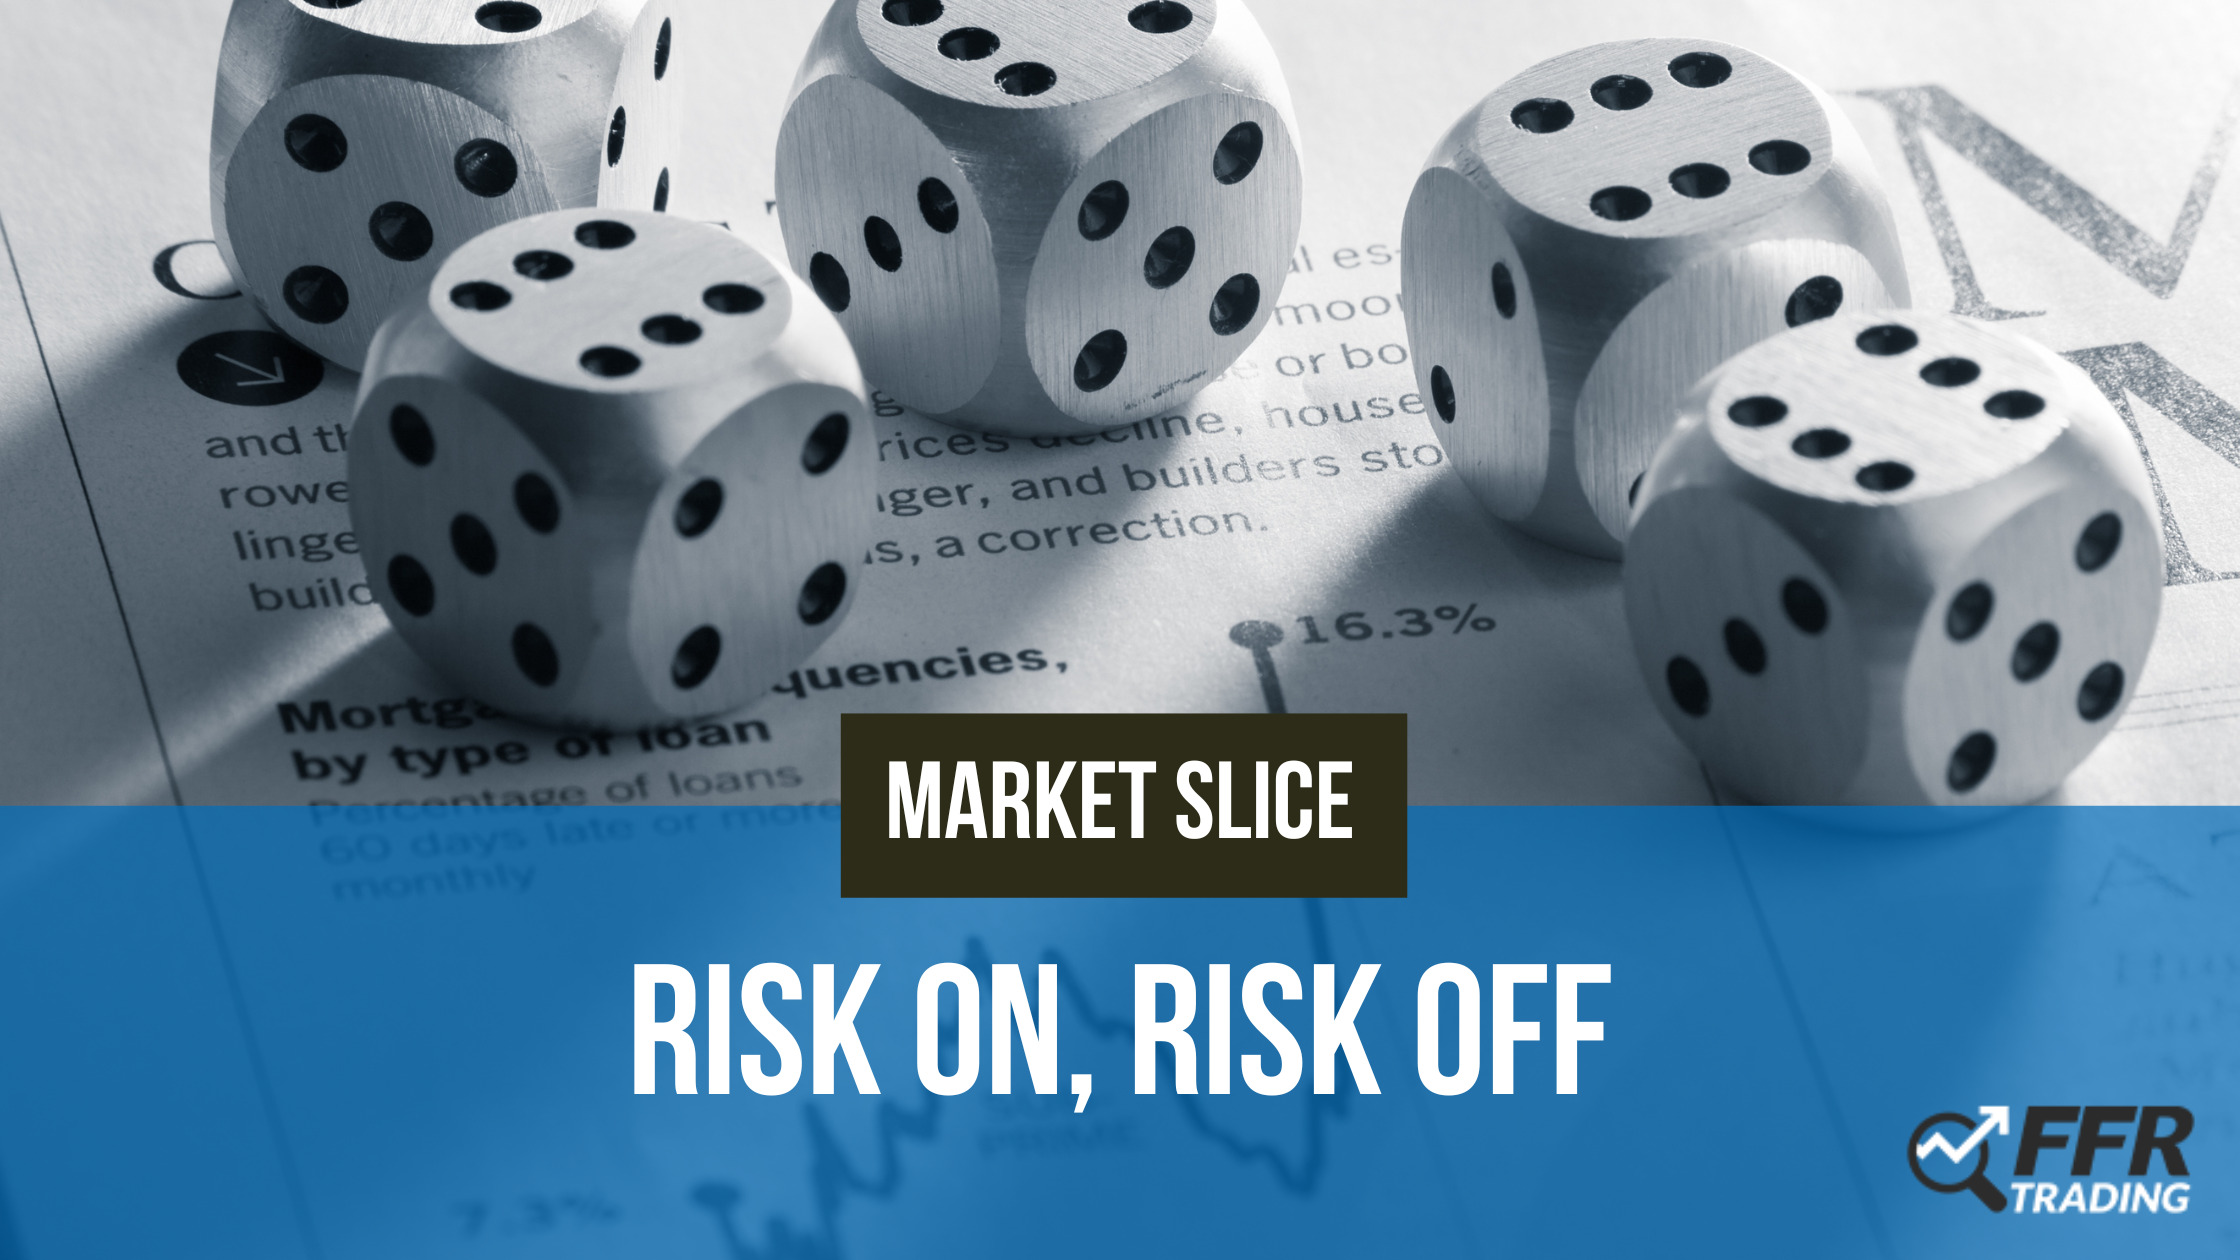 Dice to show risk on trading, stock market